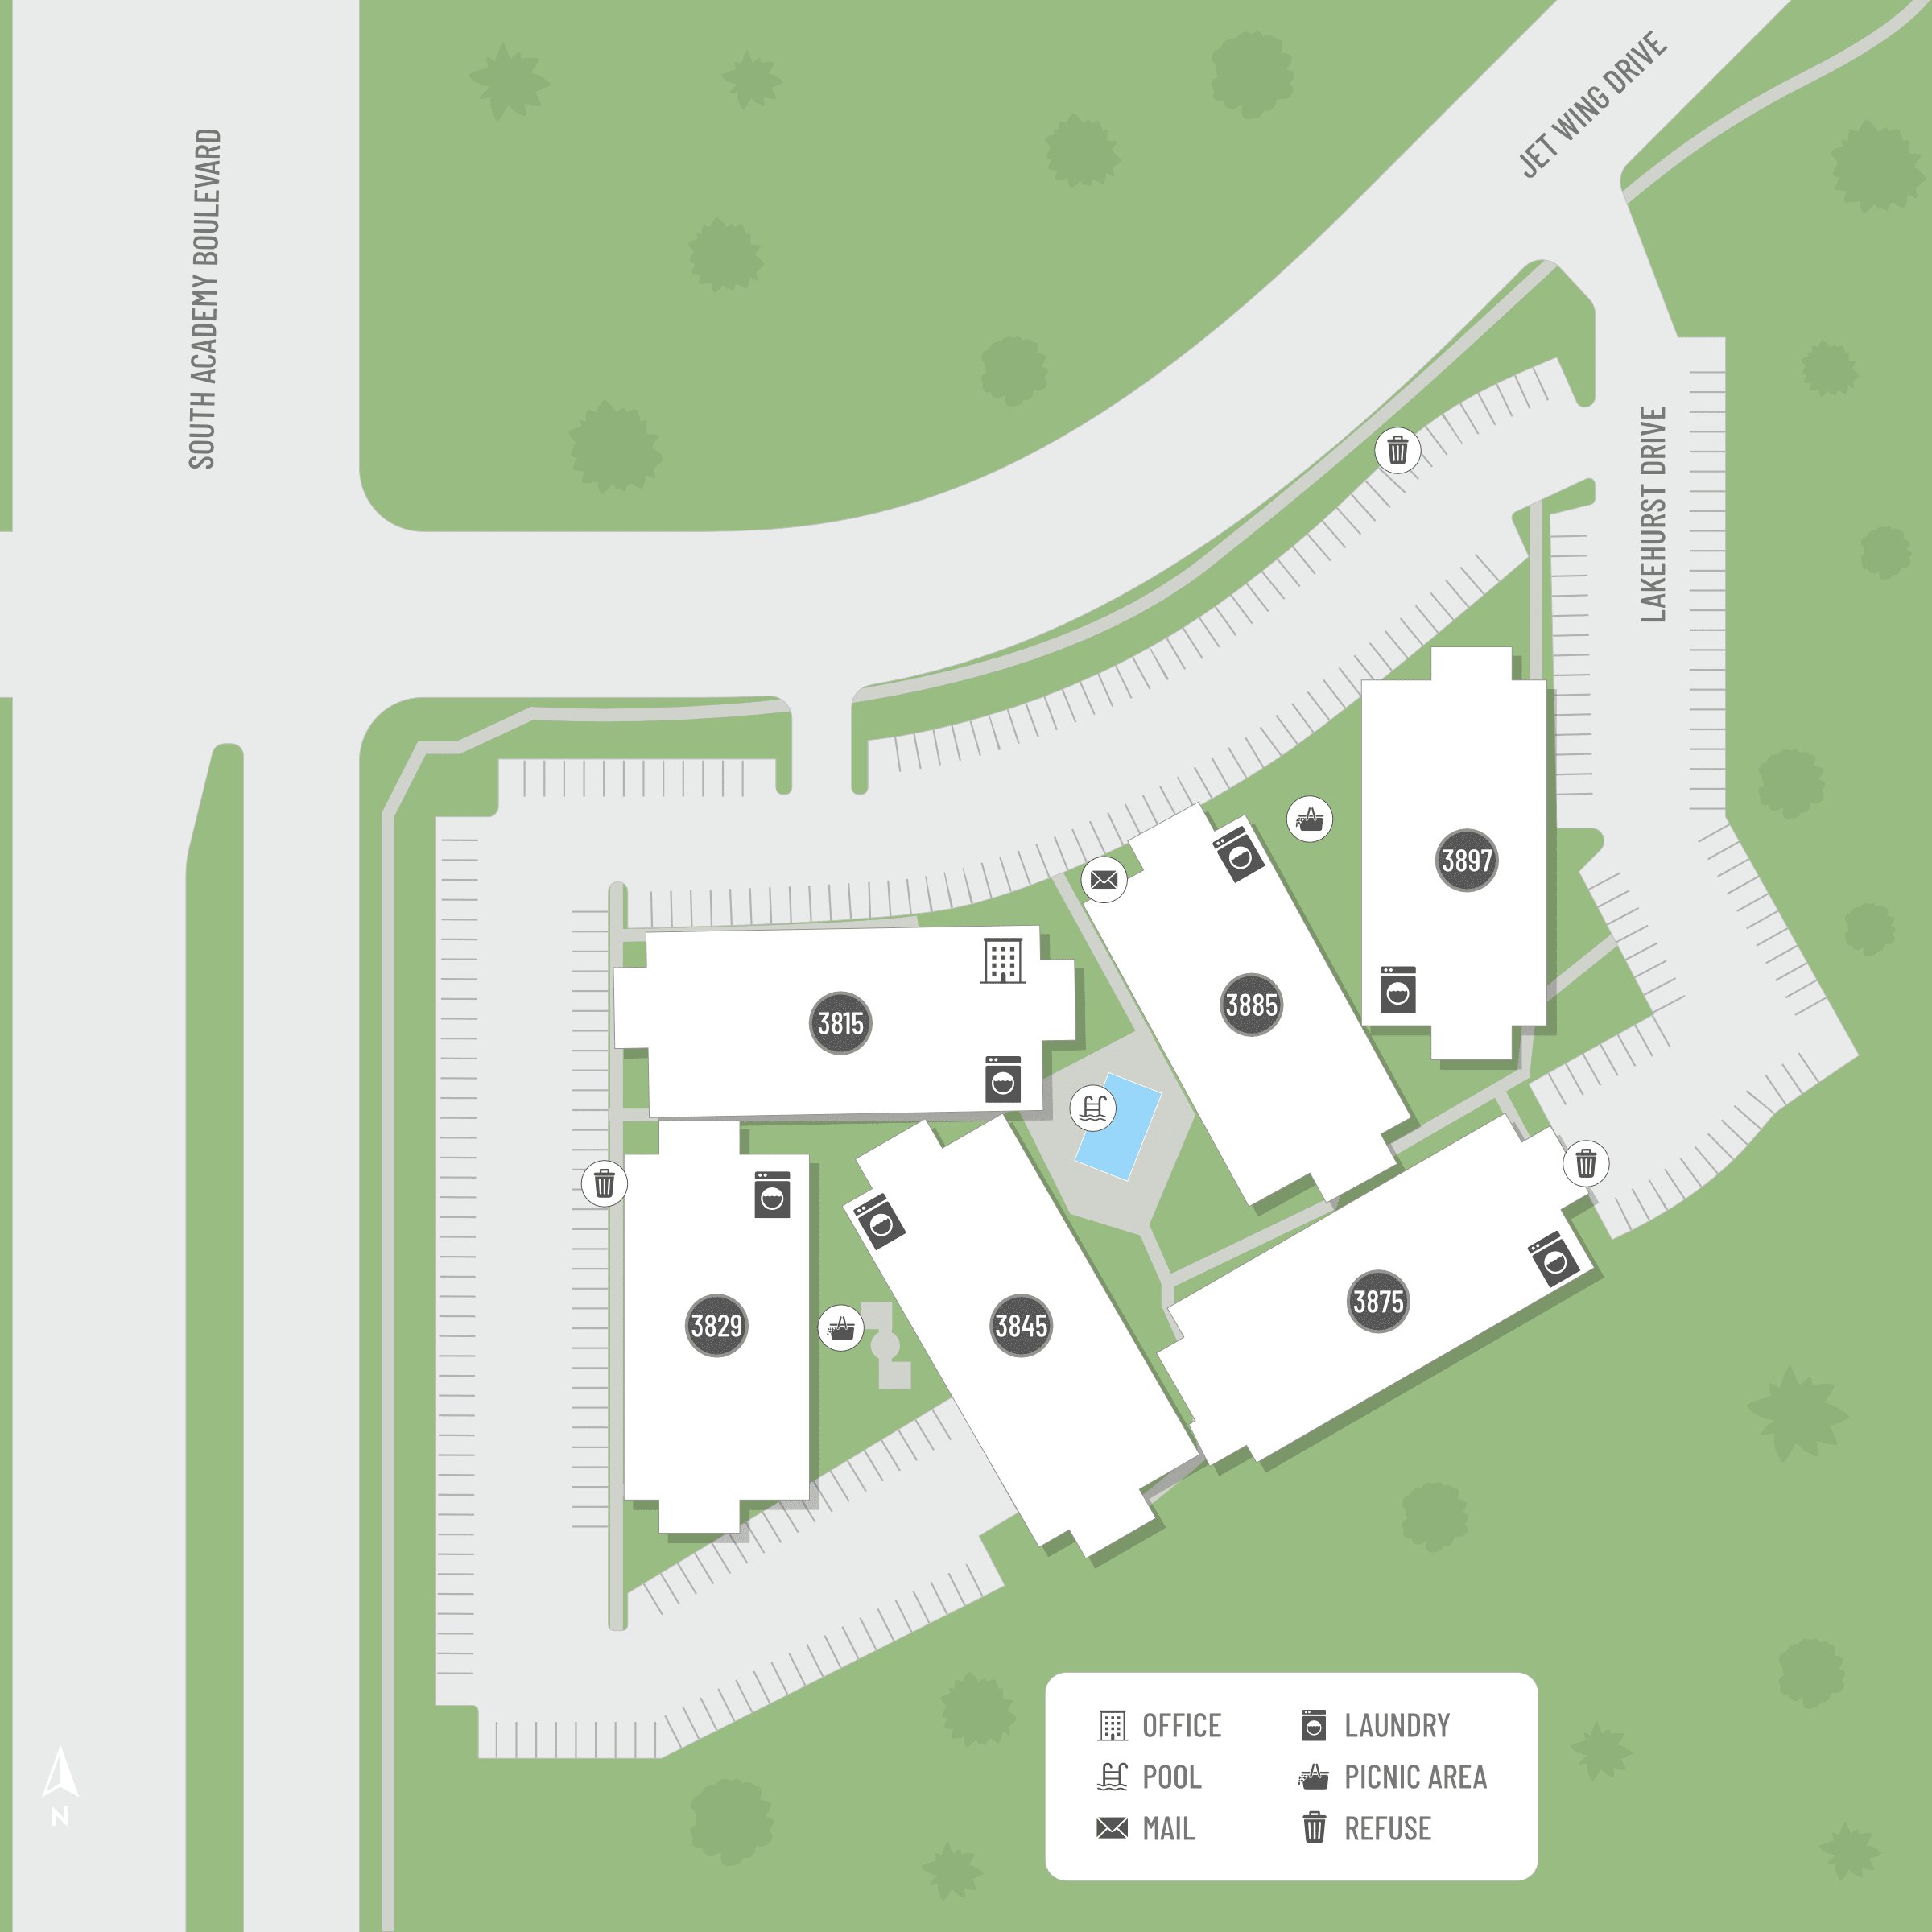 Site map at Aero Place Apartments, located in Colorado Springs, CO